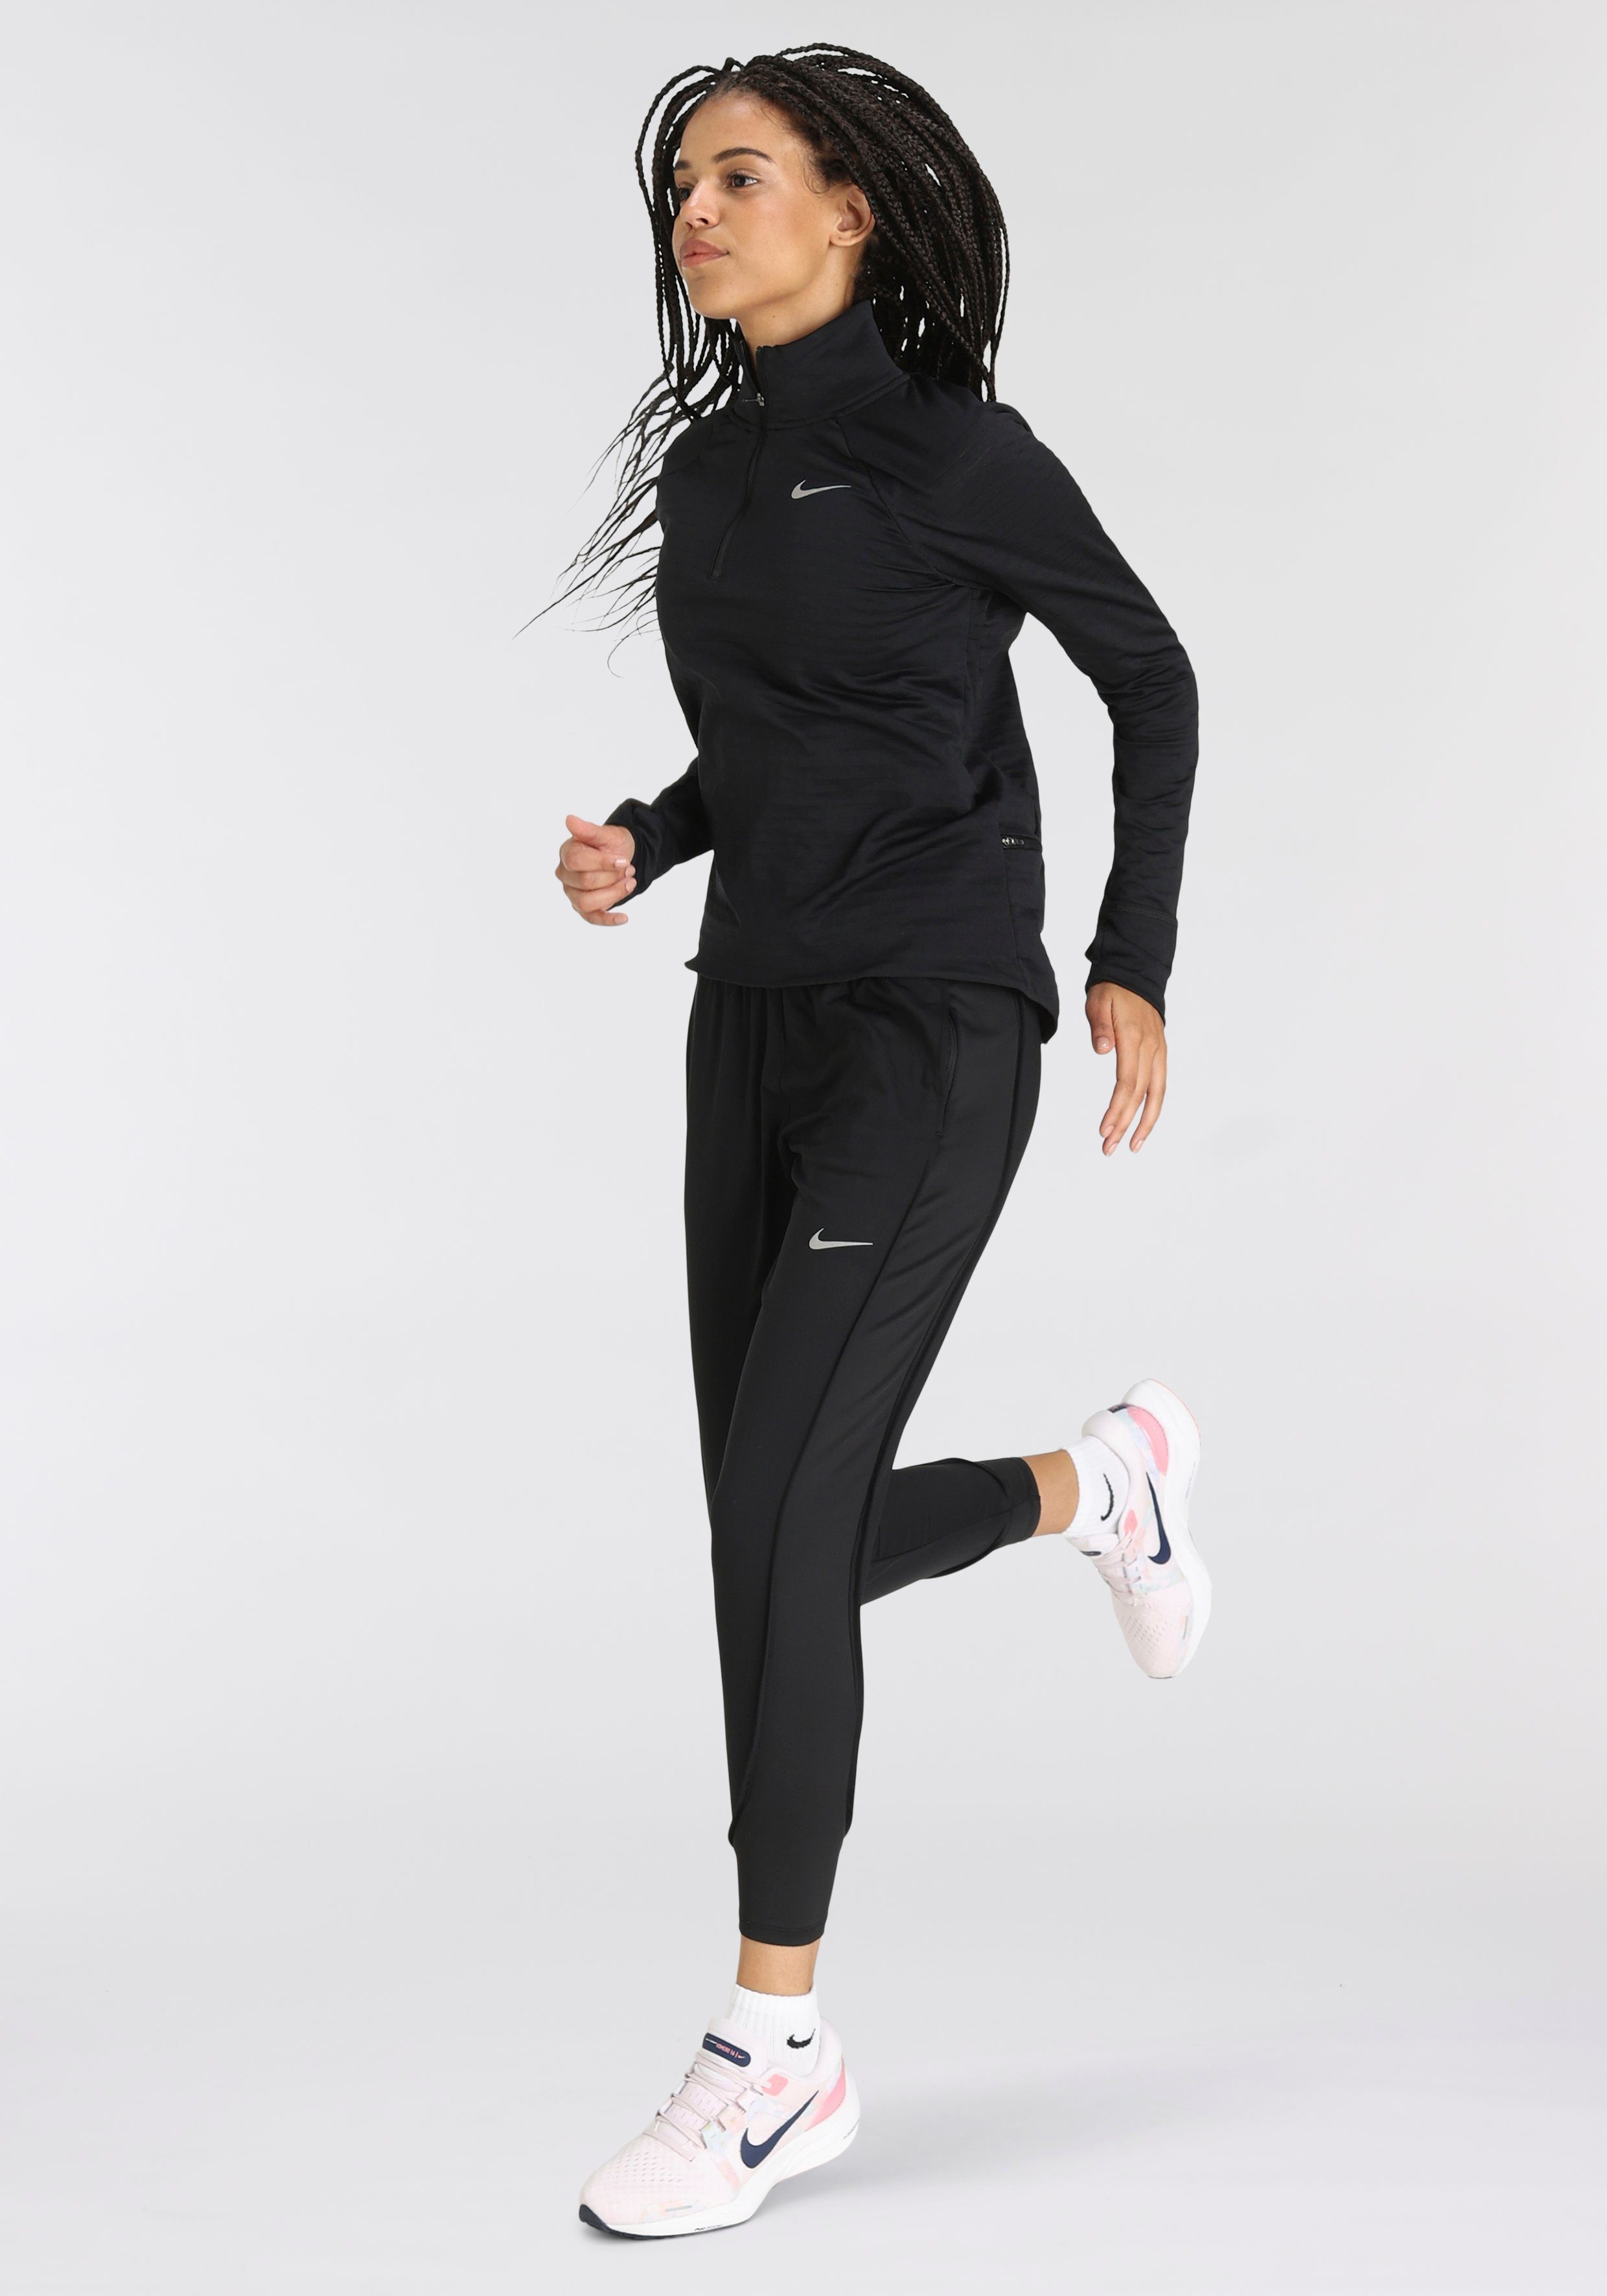 Essential Nike Laufhose Running Pants Therma-FIT Women's